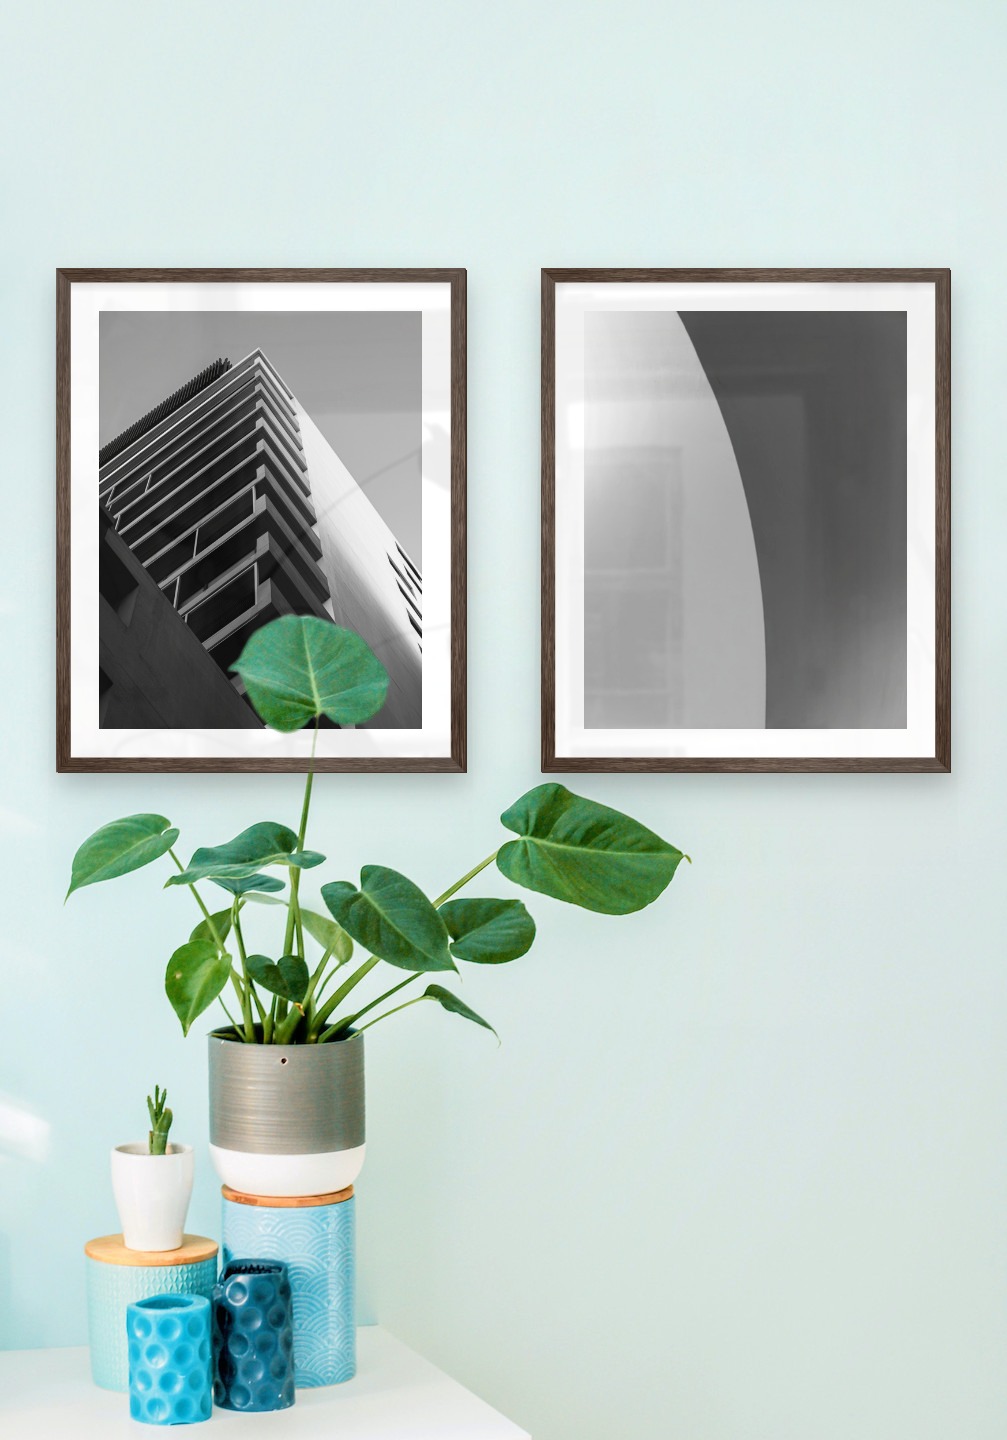 Gallery wall with picture frames in dark wood in sizes 40x50 with prints "Black and white building" and "Line"